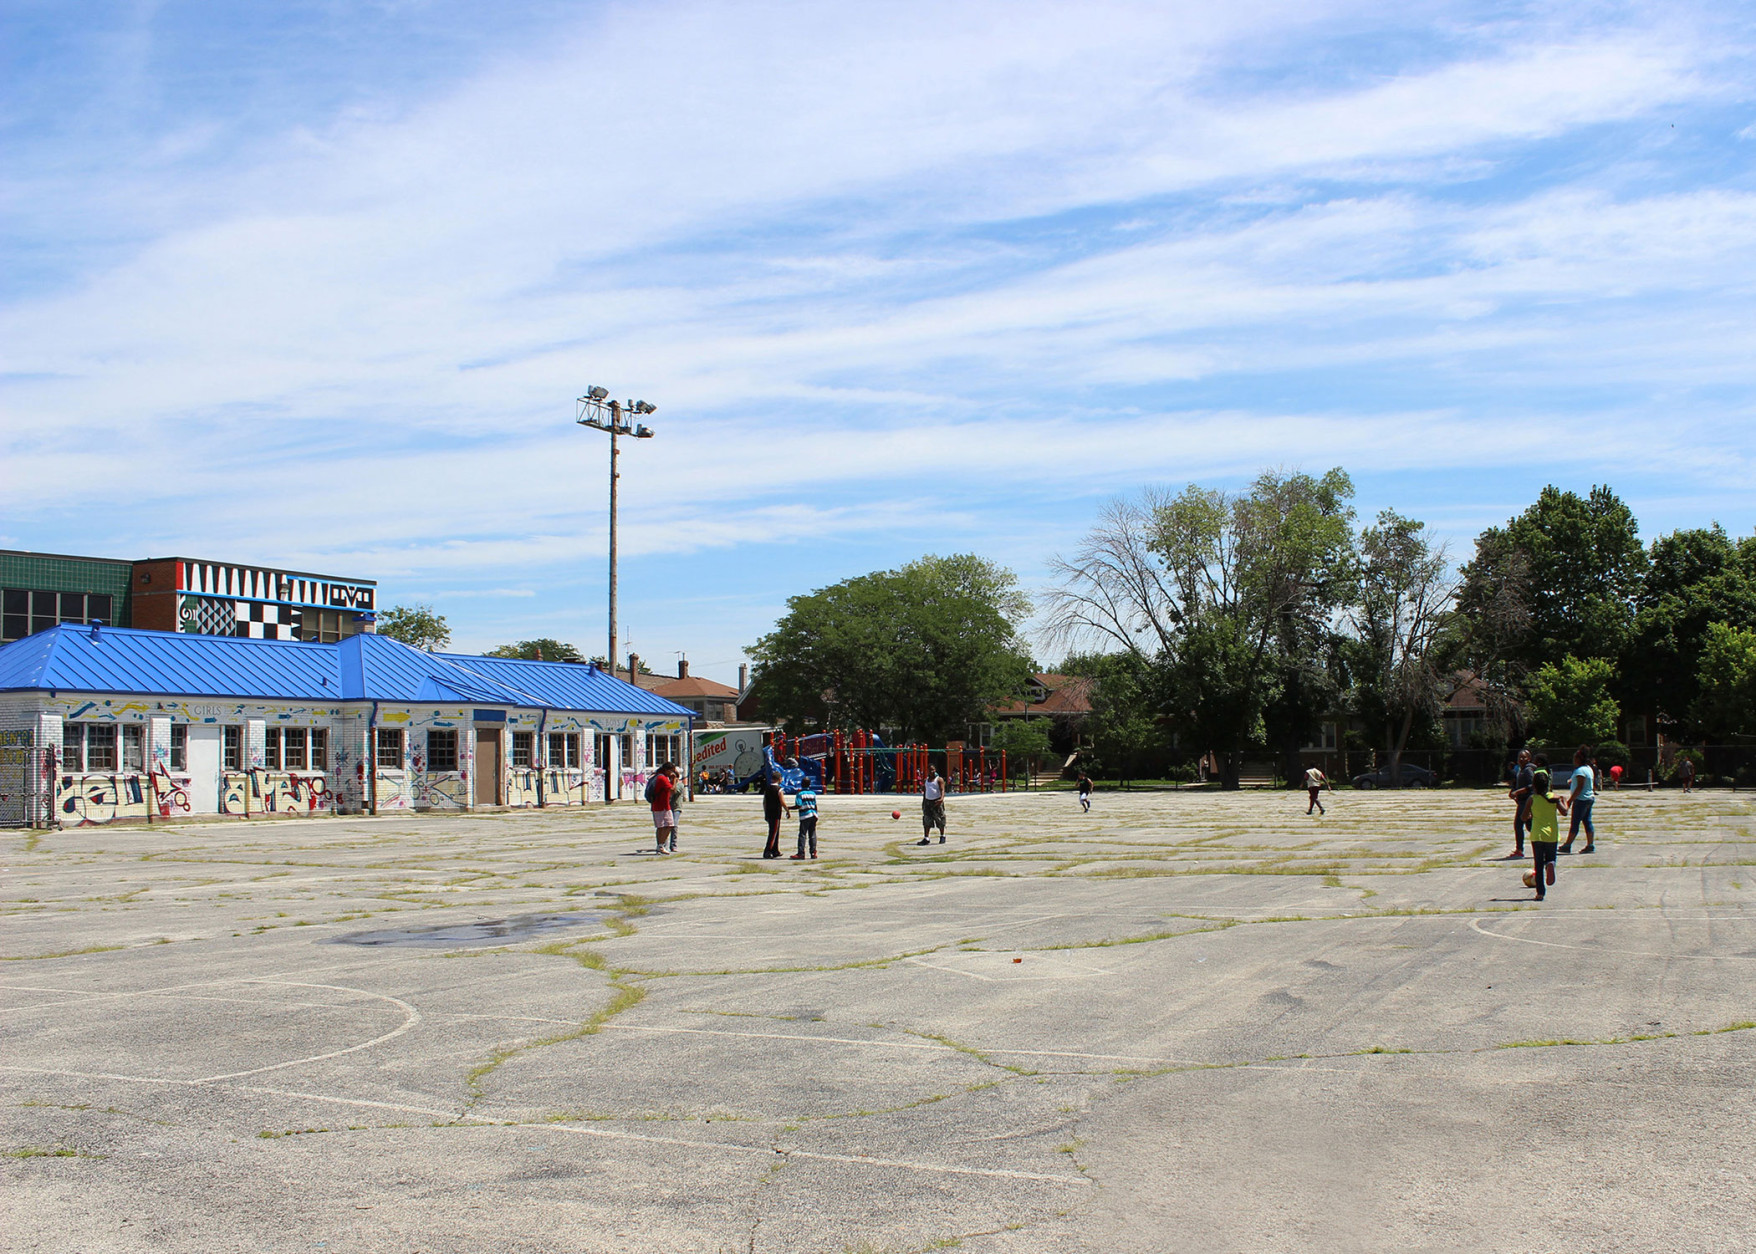 The playground at Donald L. Morrill Math & Science School prior to its transformation.